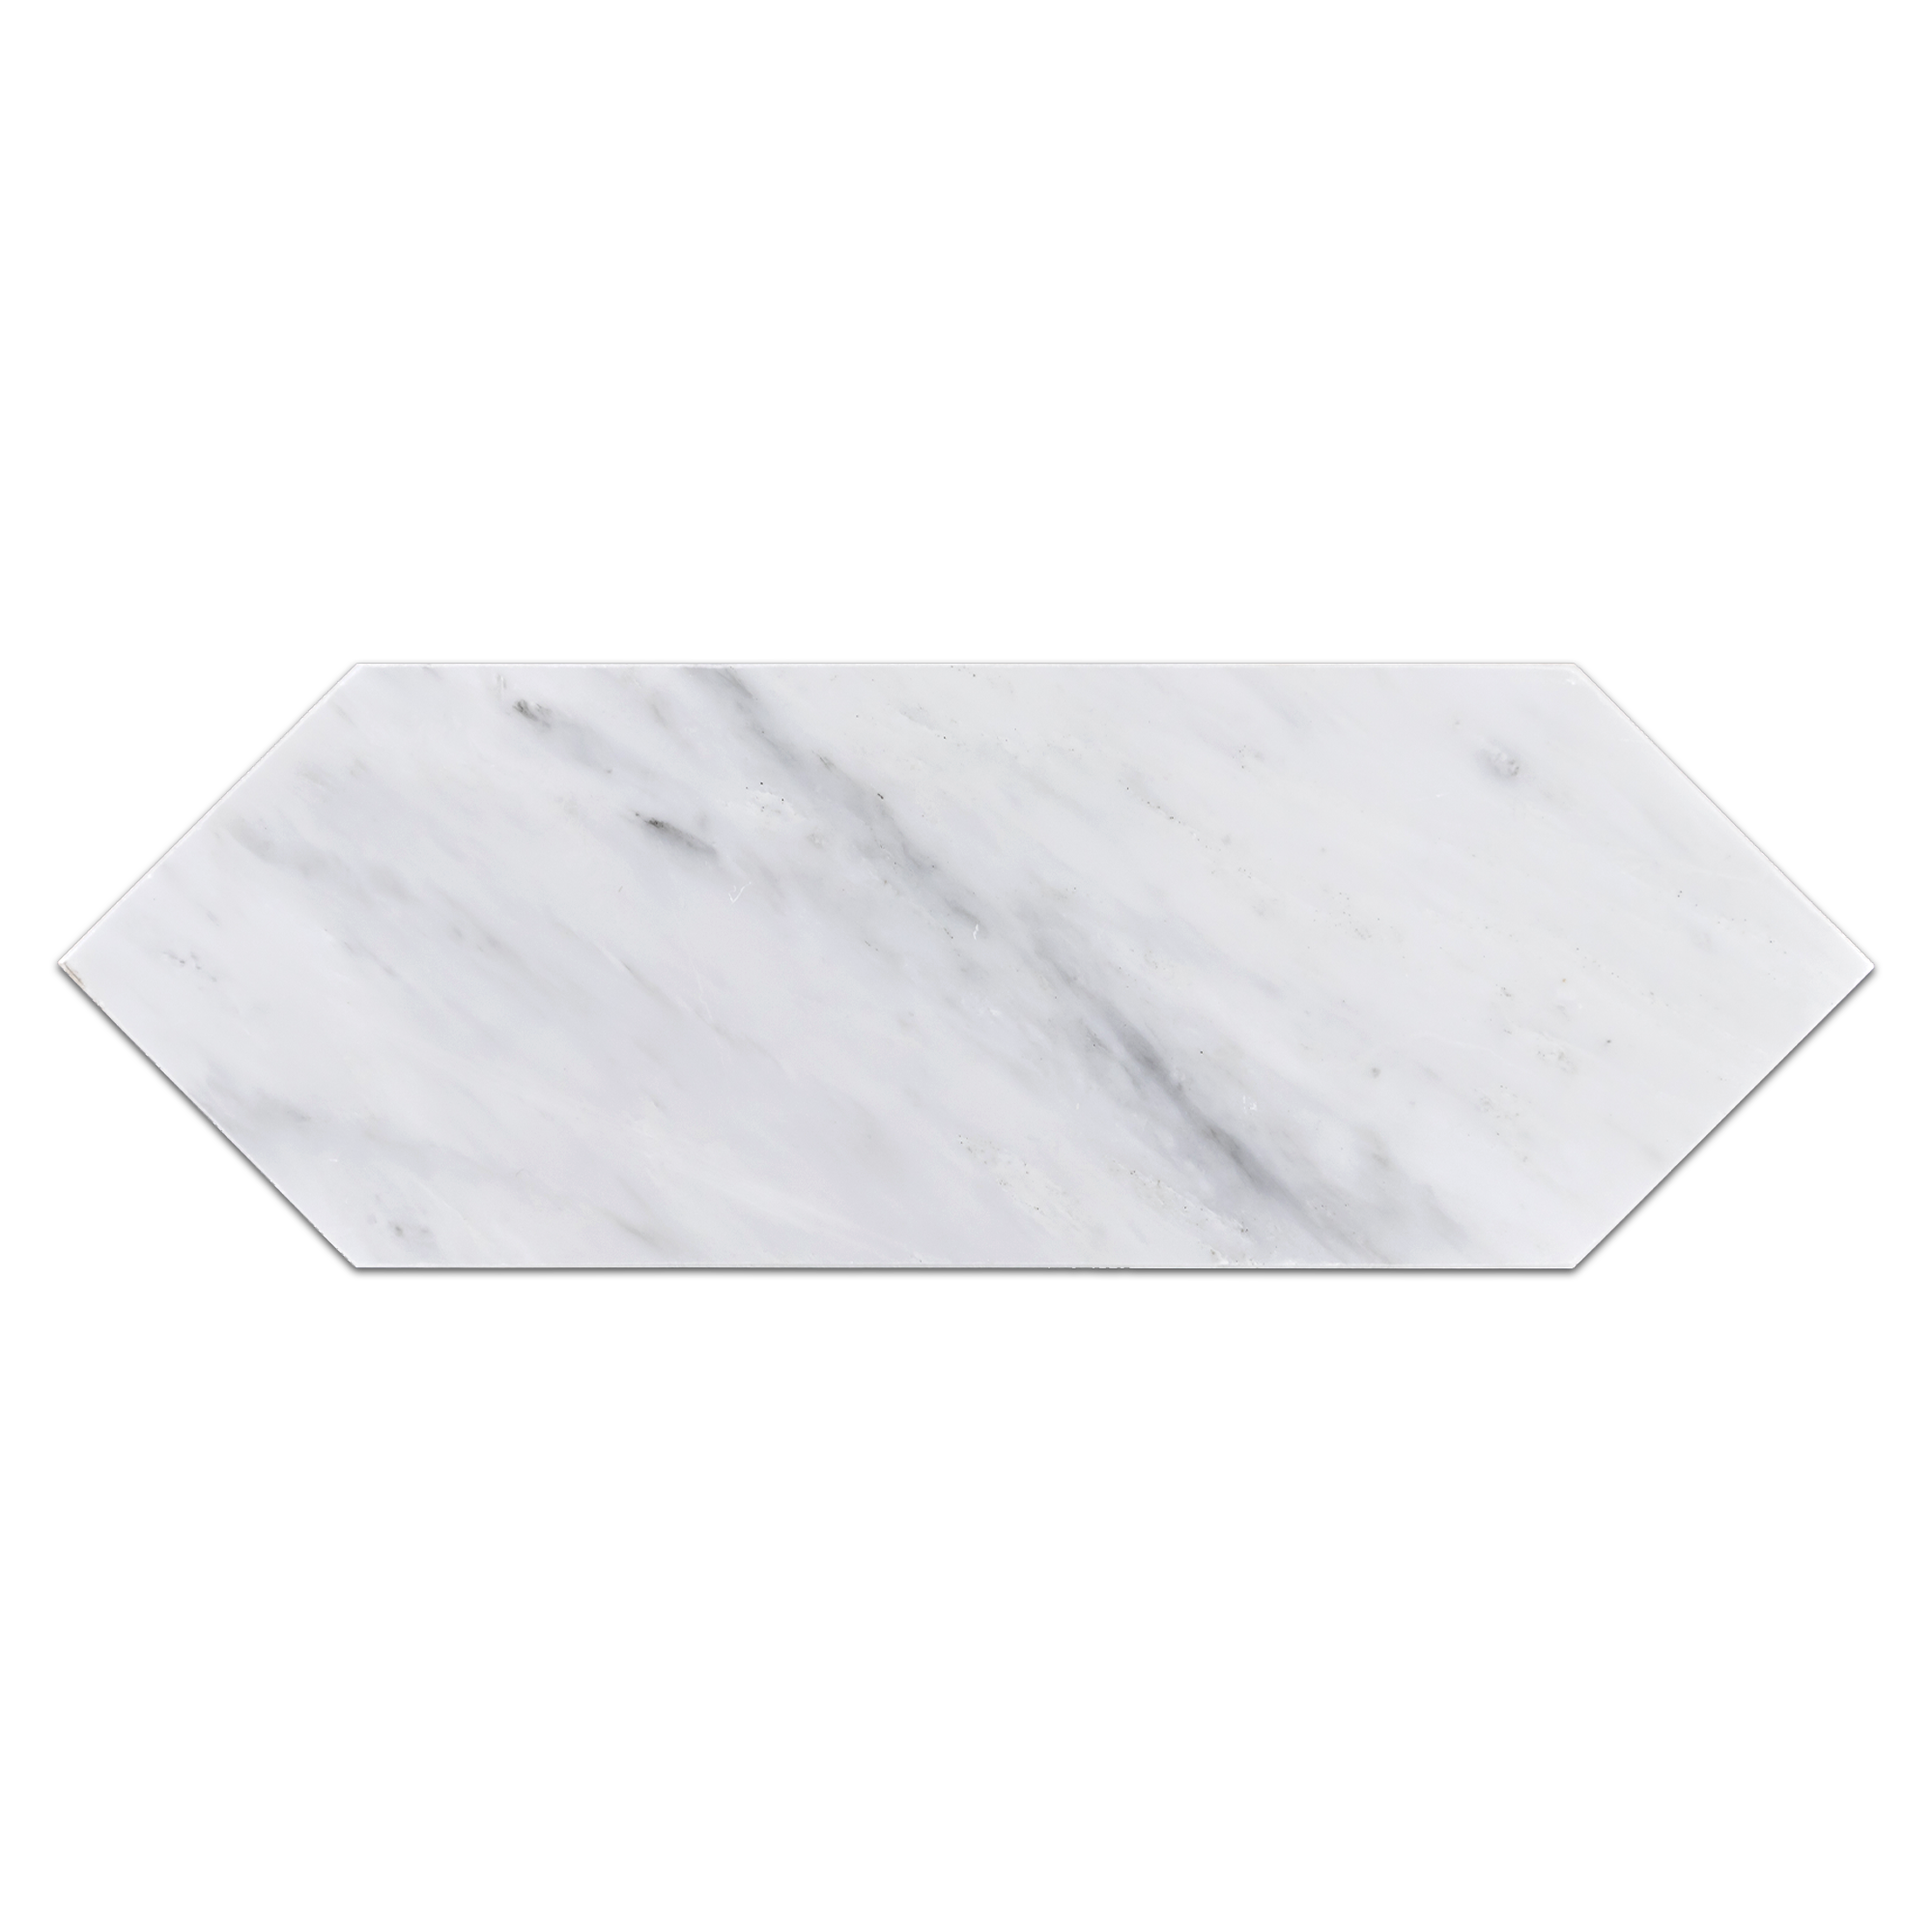 Elon Pearl White Marble Picket Field Tile 4x12x0.375 Polished - Surface Group International